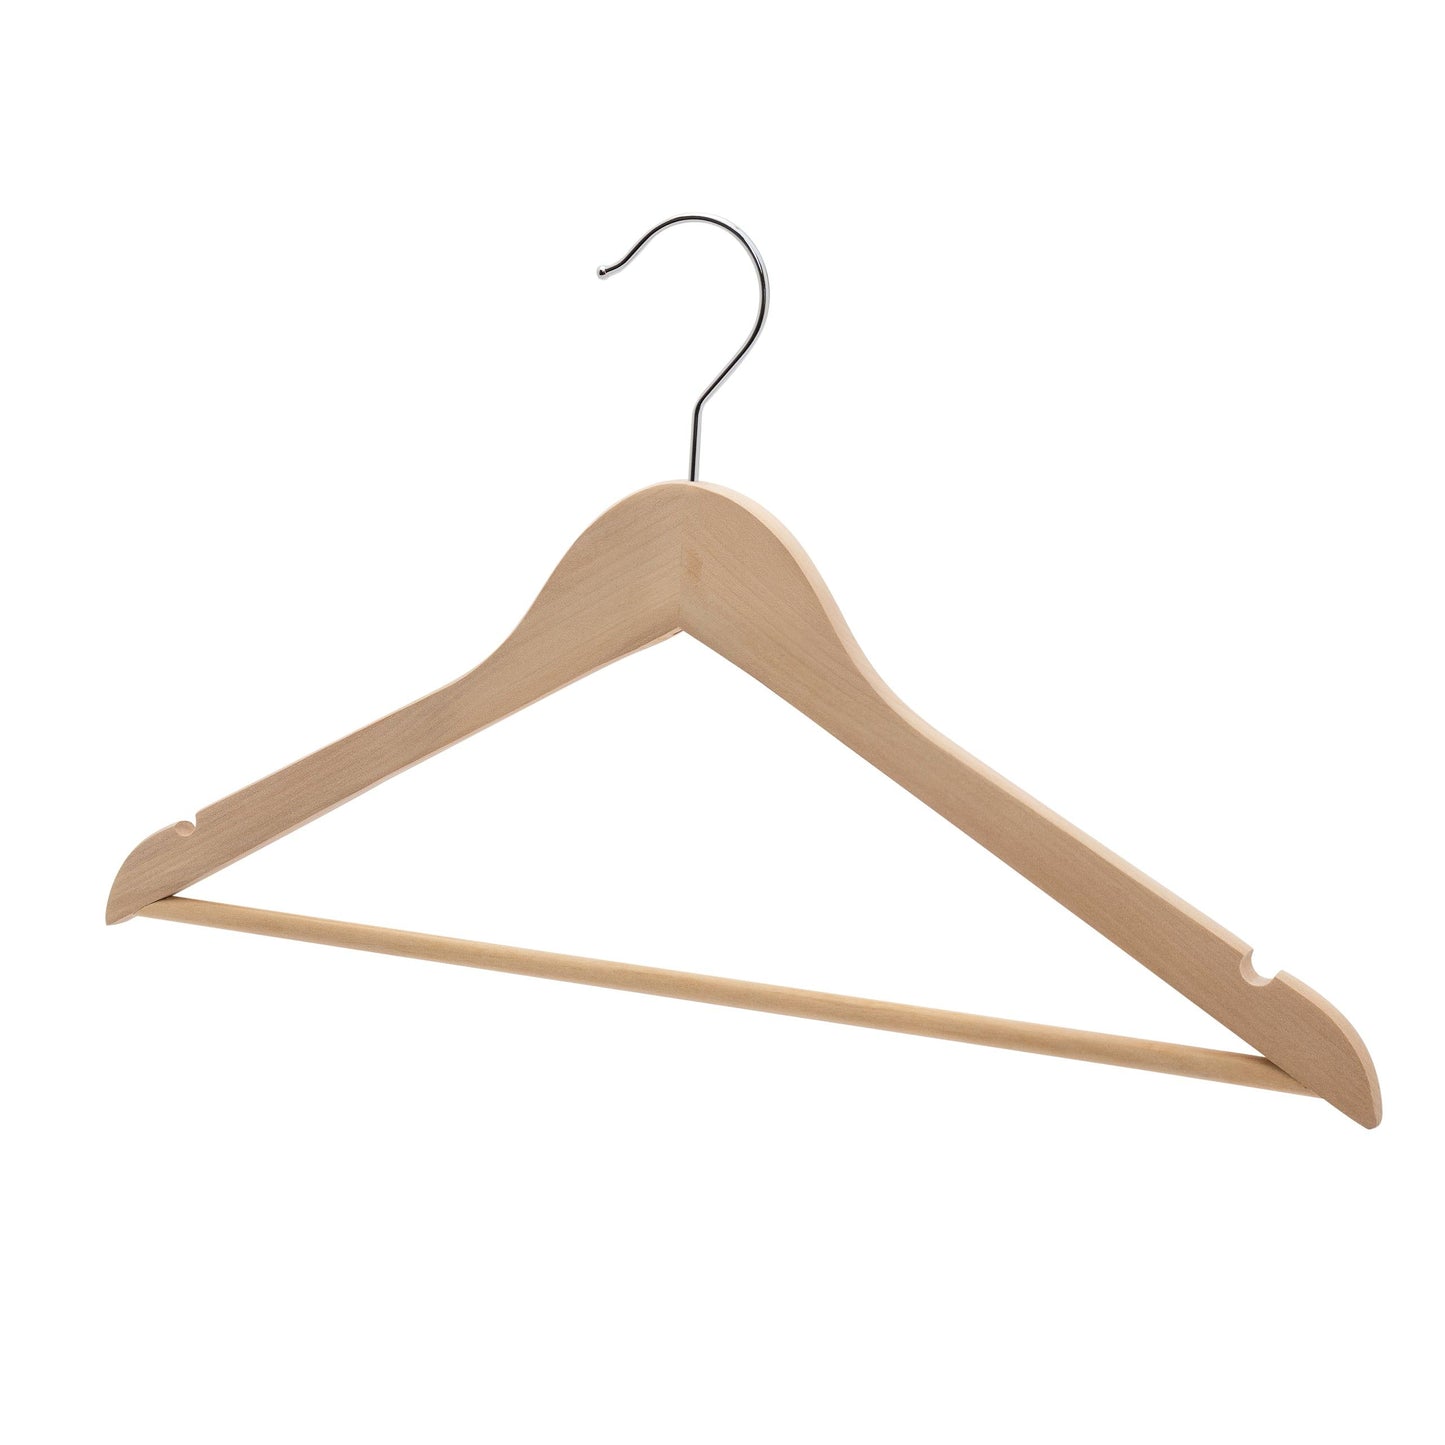 Premium Wooden Coat Hanger NO Varnish - Fine Polished Surface - 44.5cm X 12mm Thick Sold in 25/50/100